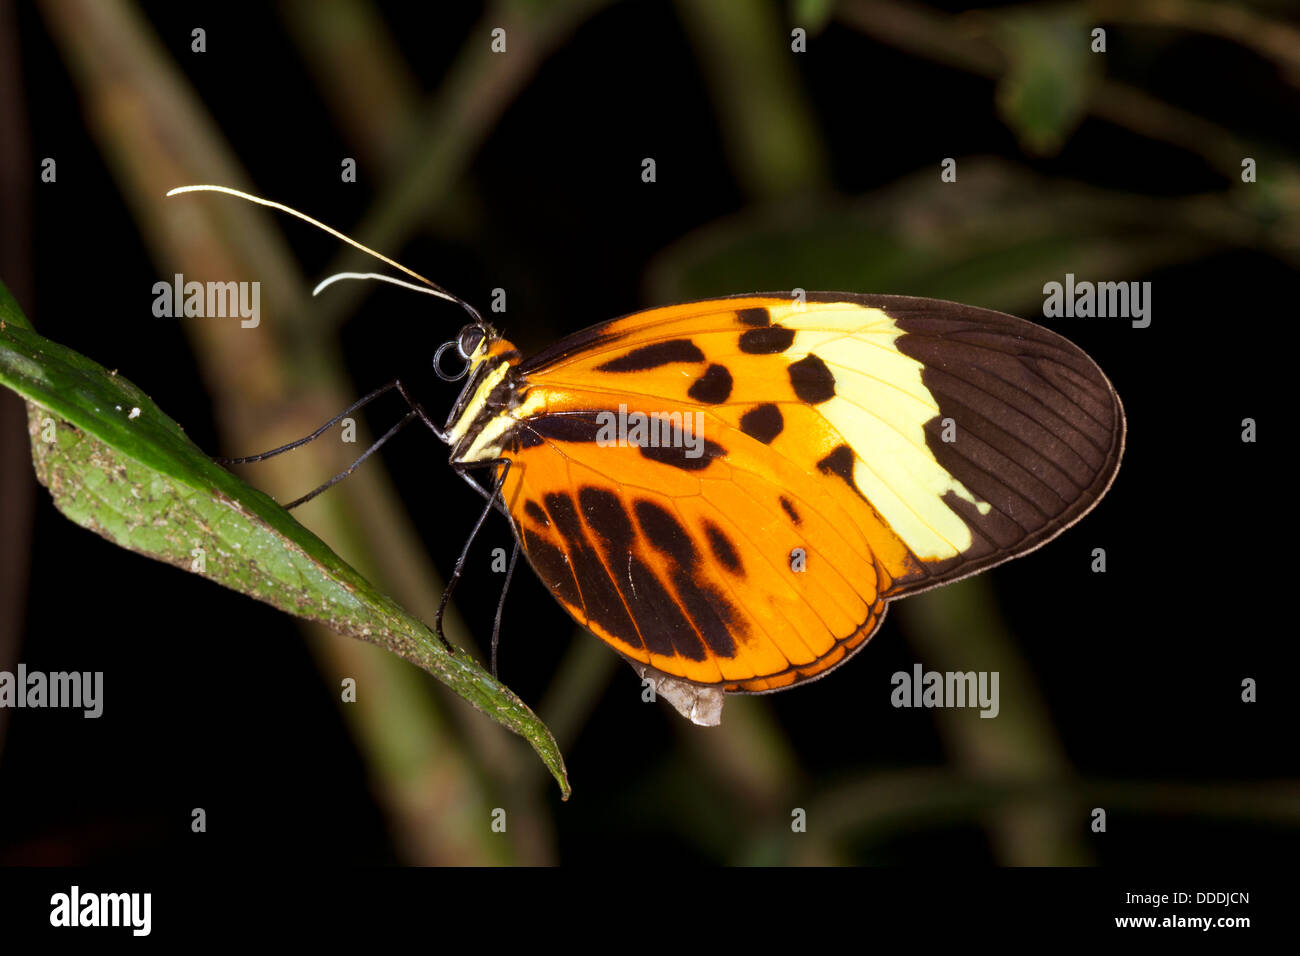 Postman butterfly (Heliconius sp.) roosting in the rainforest understory at night Stock Photo